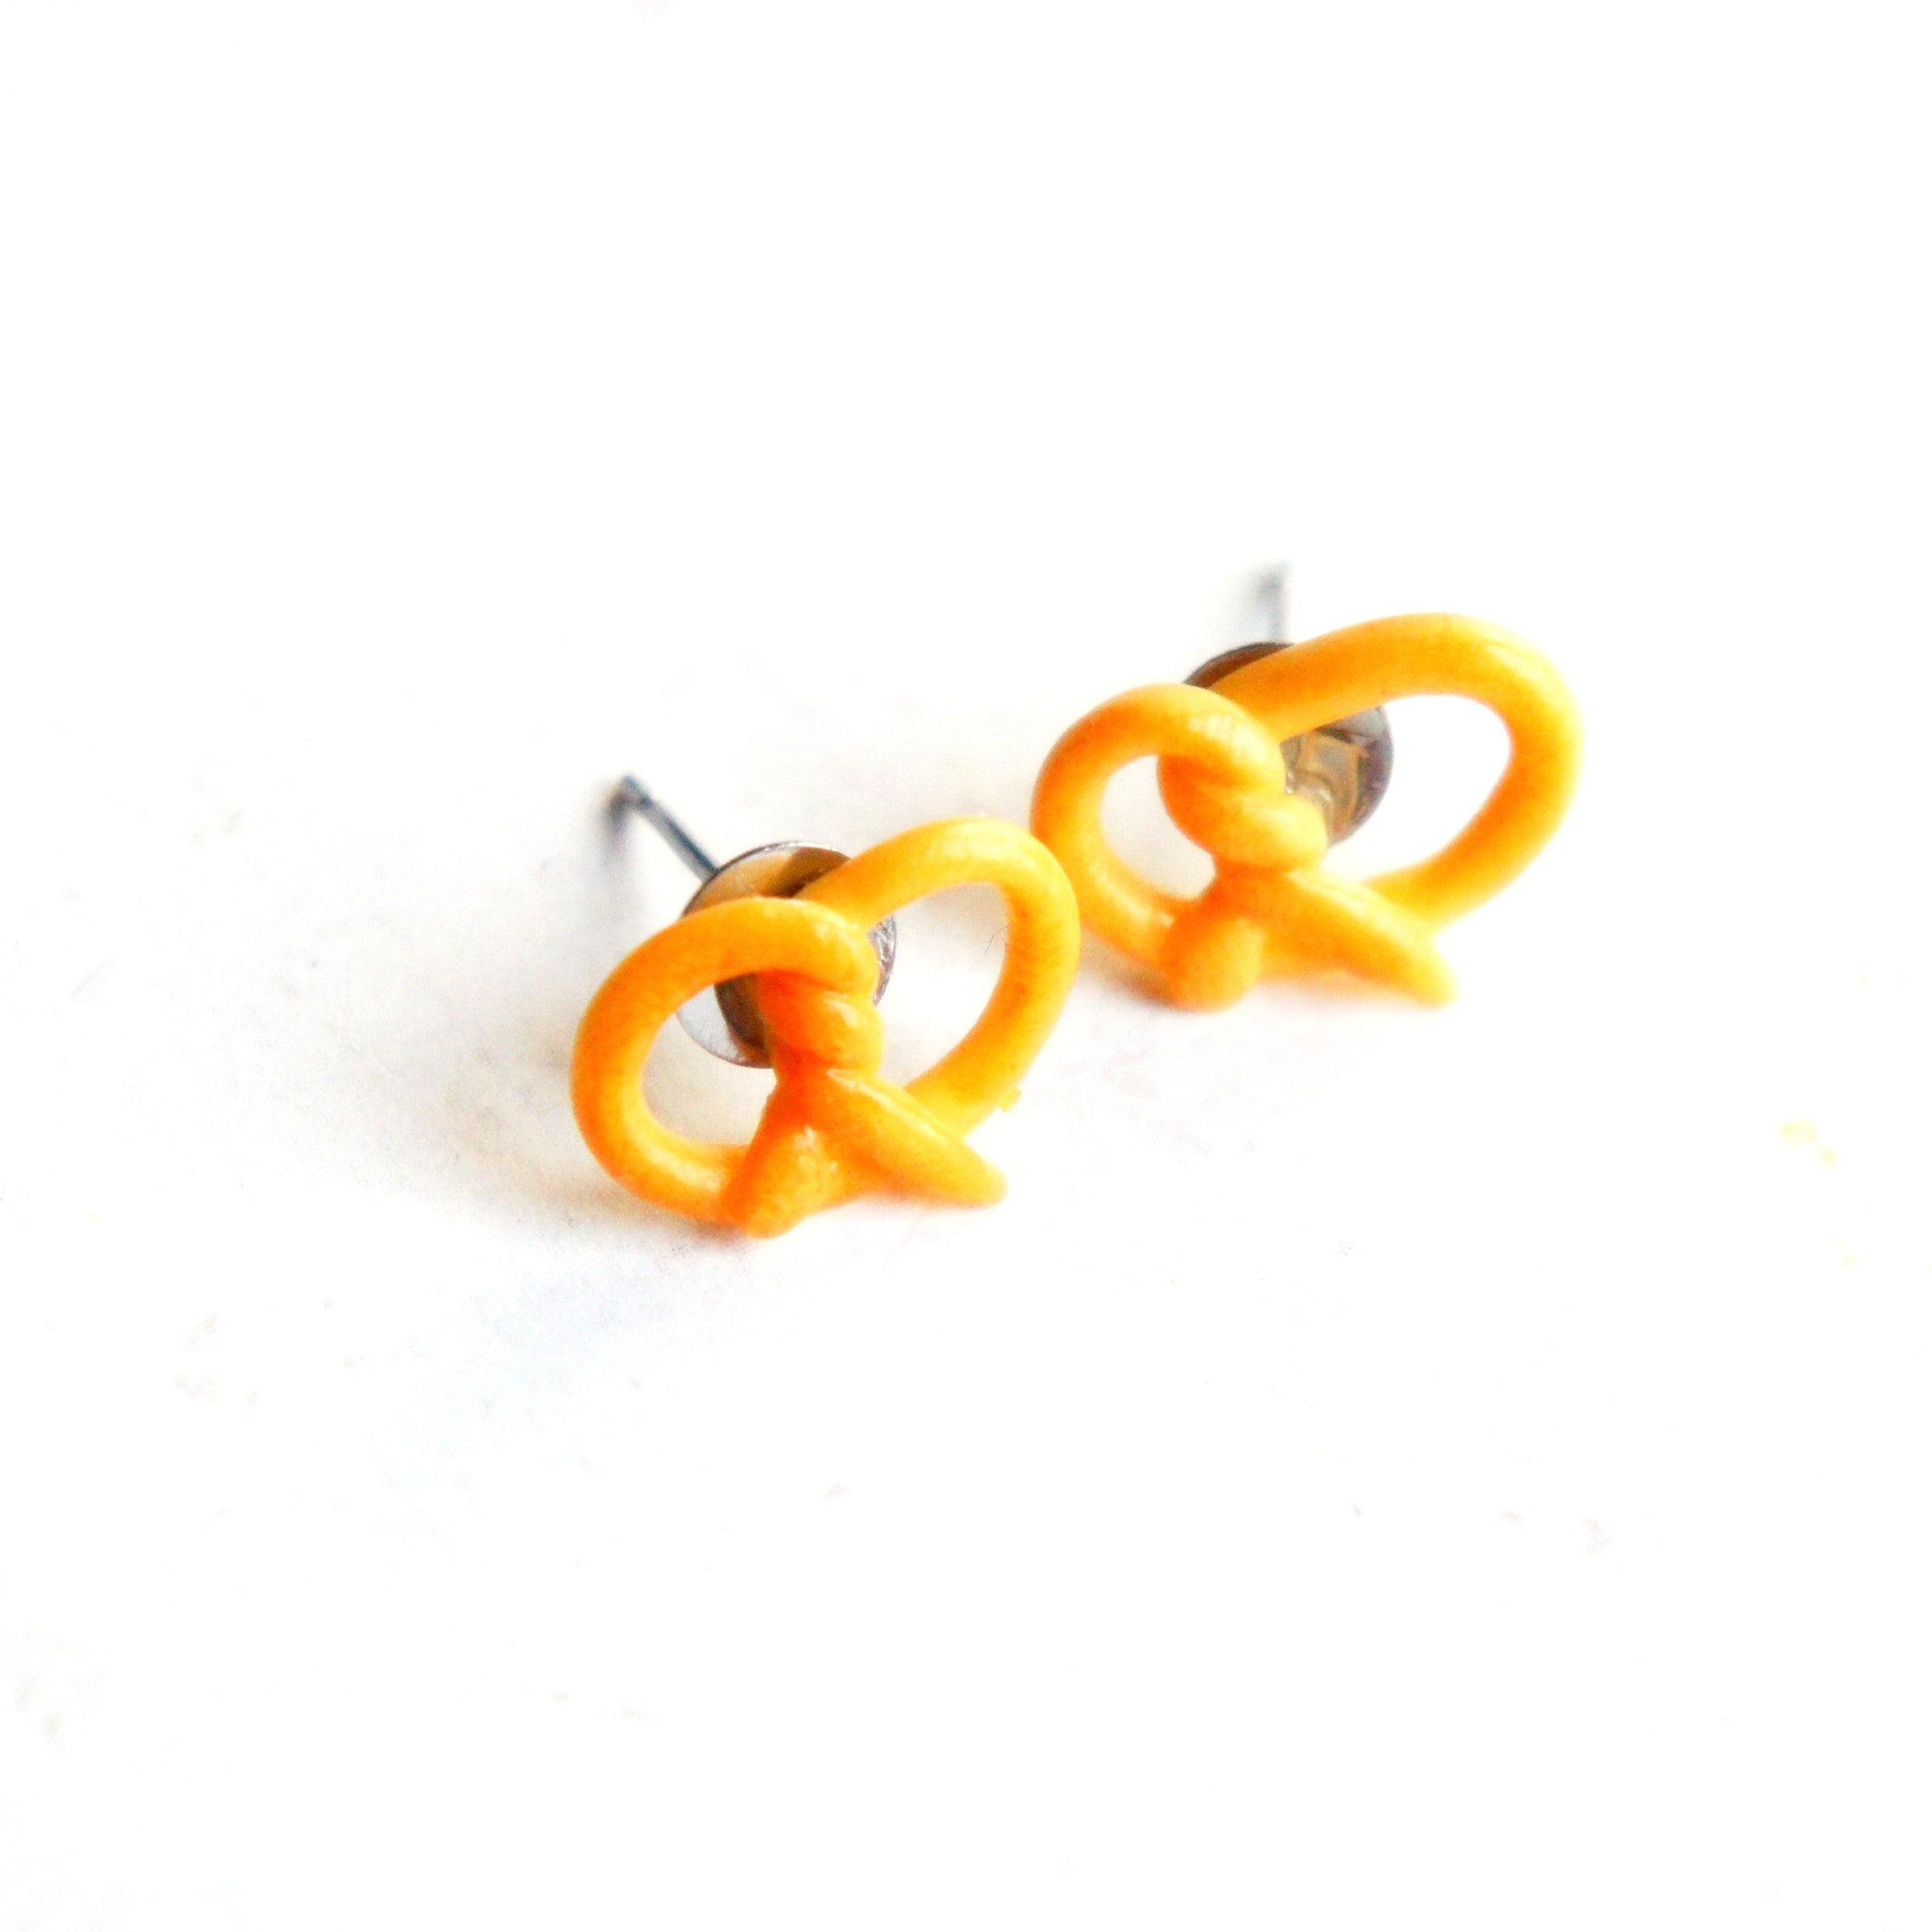 Pretzels Stud Earrings - Jillicious charms and accessories